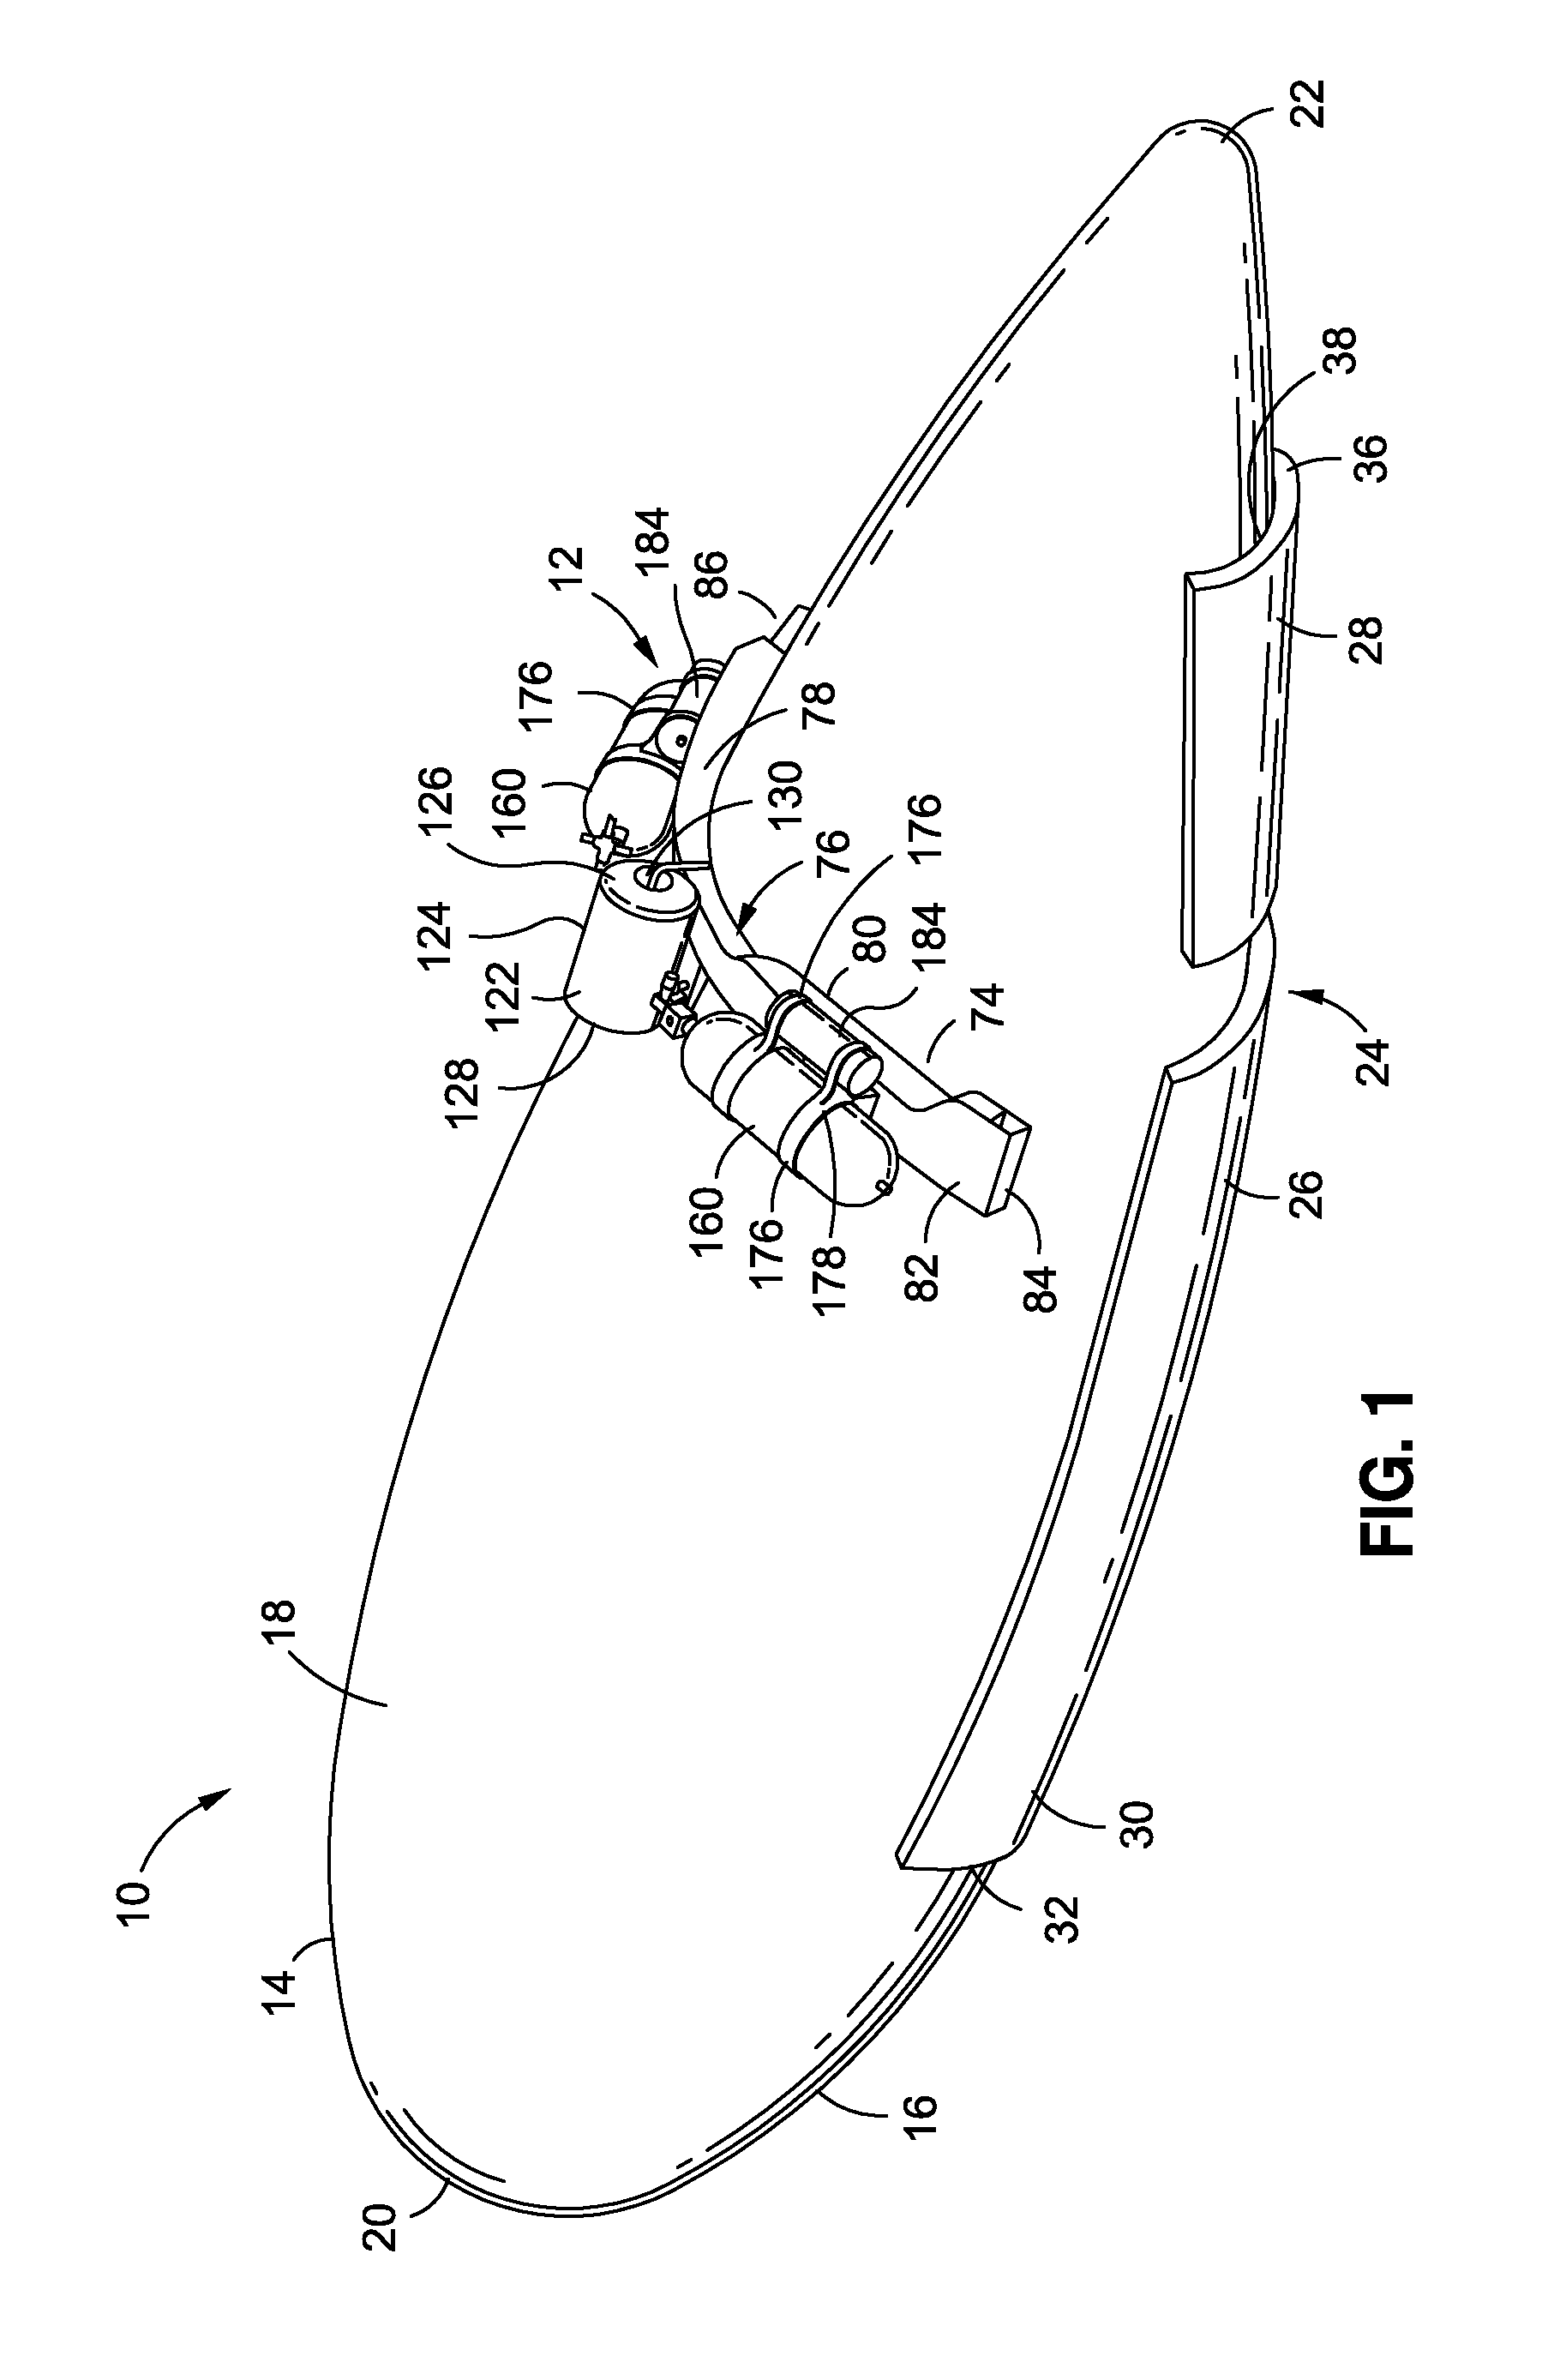 Detachable inflation system for air vehicles